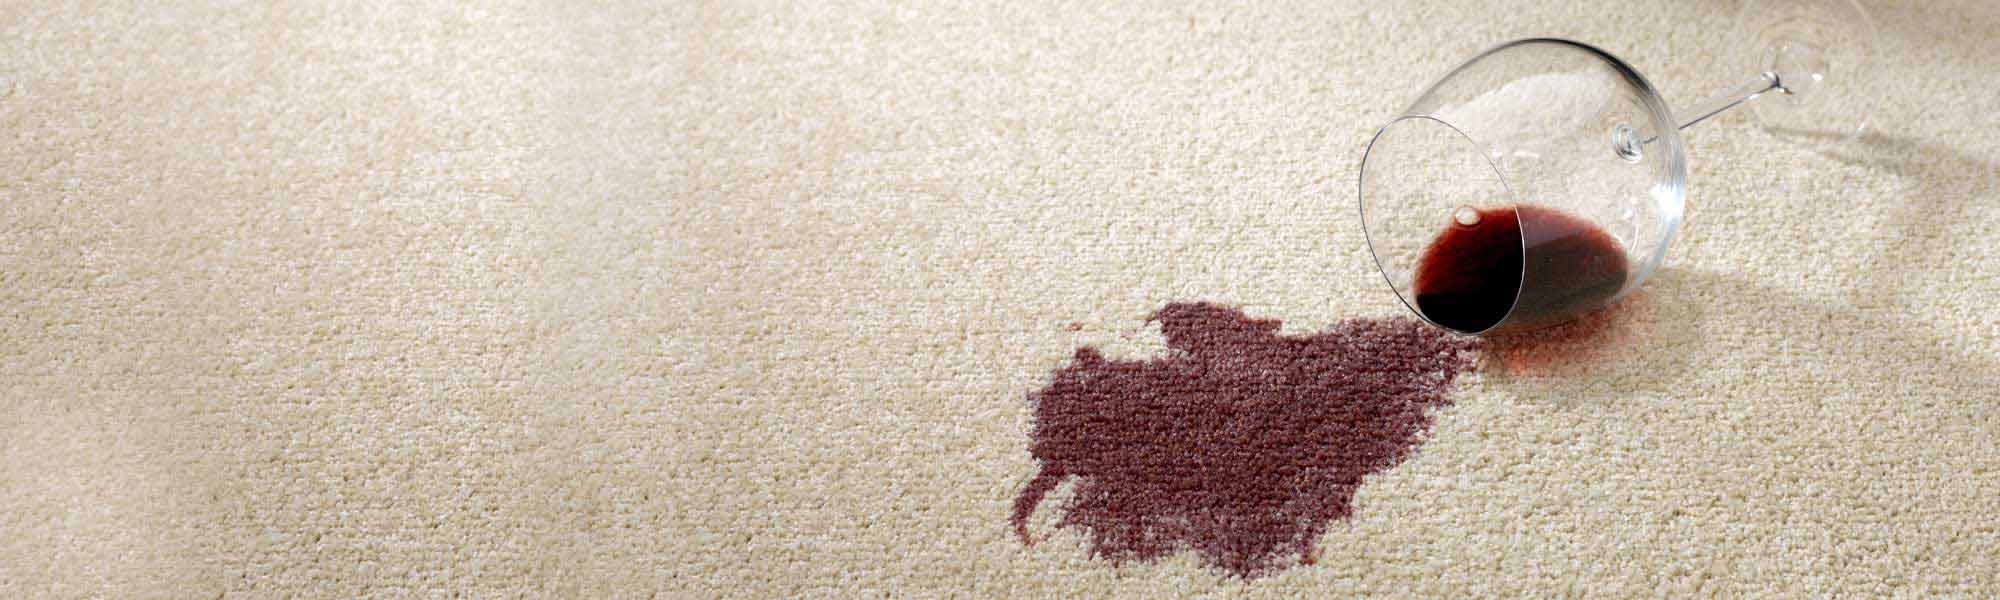 Professional Stain Removal Service done by Chem-Dry of Manhattan